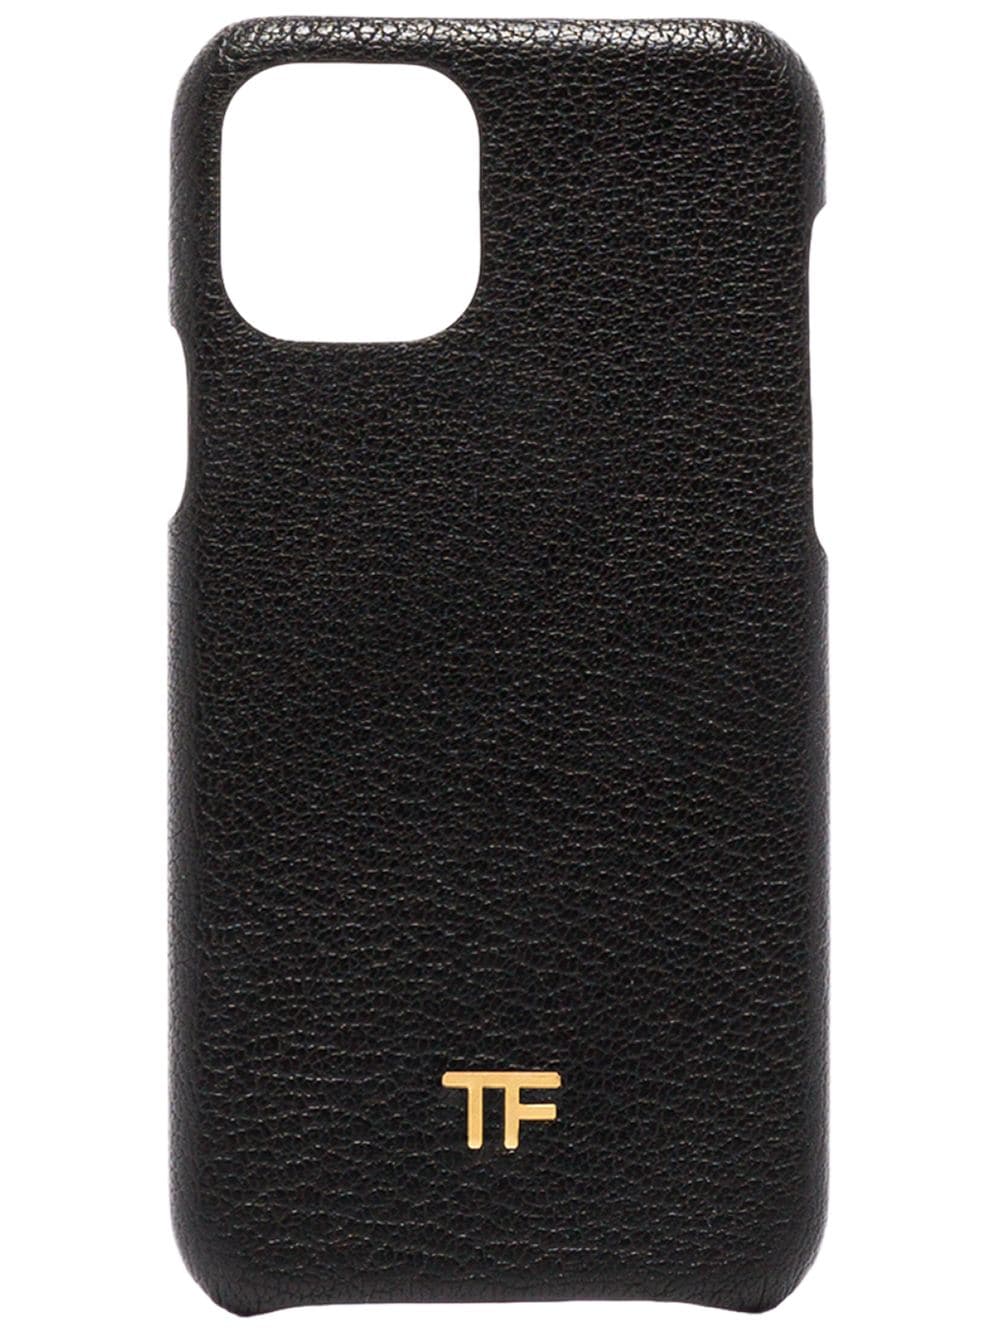 tom-ford-phone-case-iphone-11-pro-max - Front Row Edit by Cameron Tewson